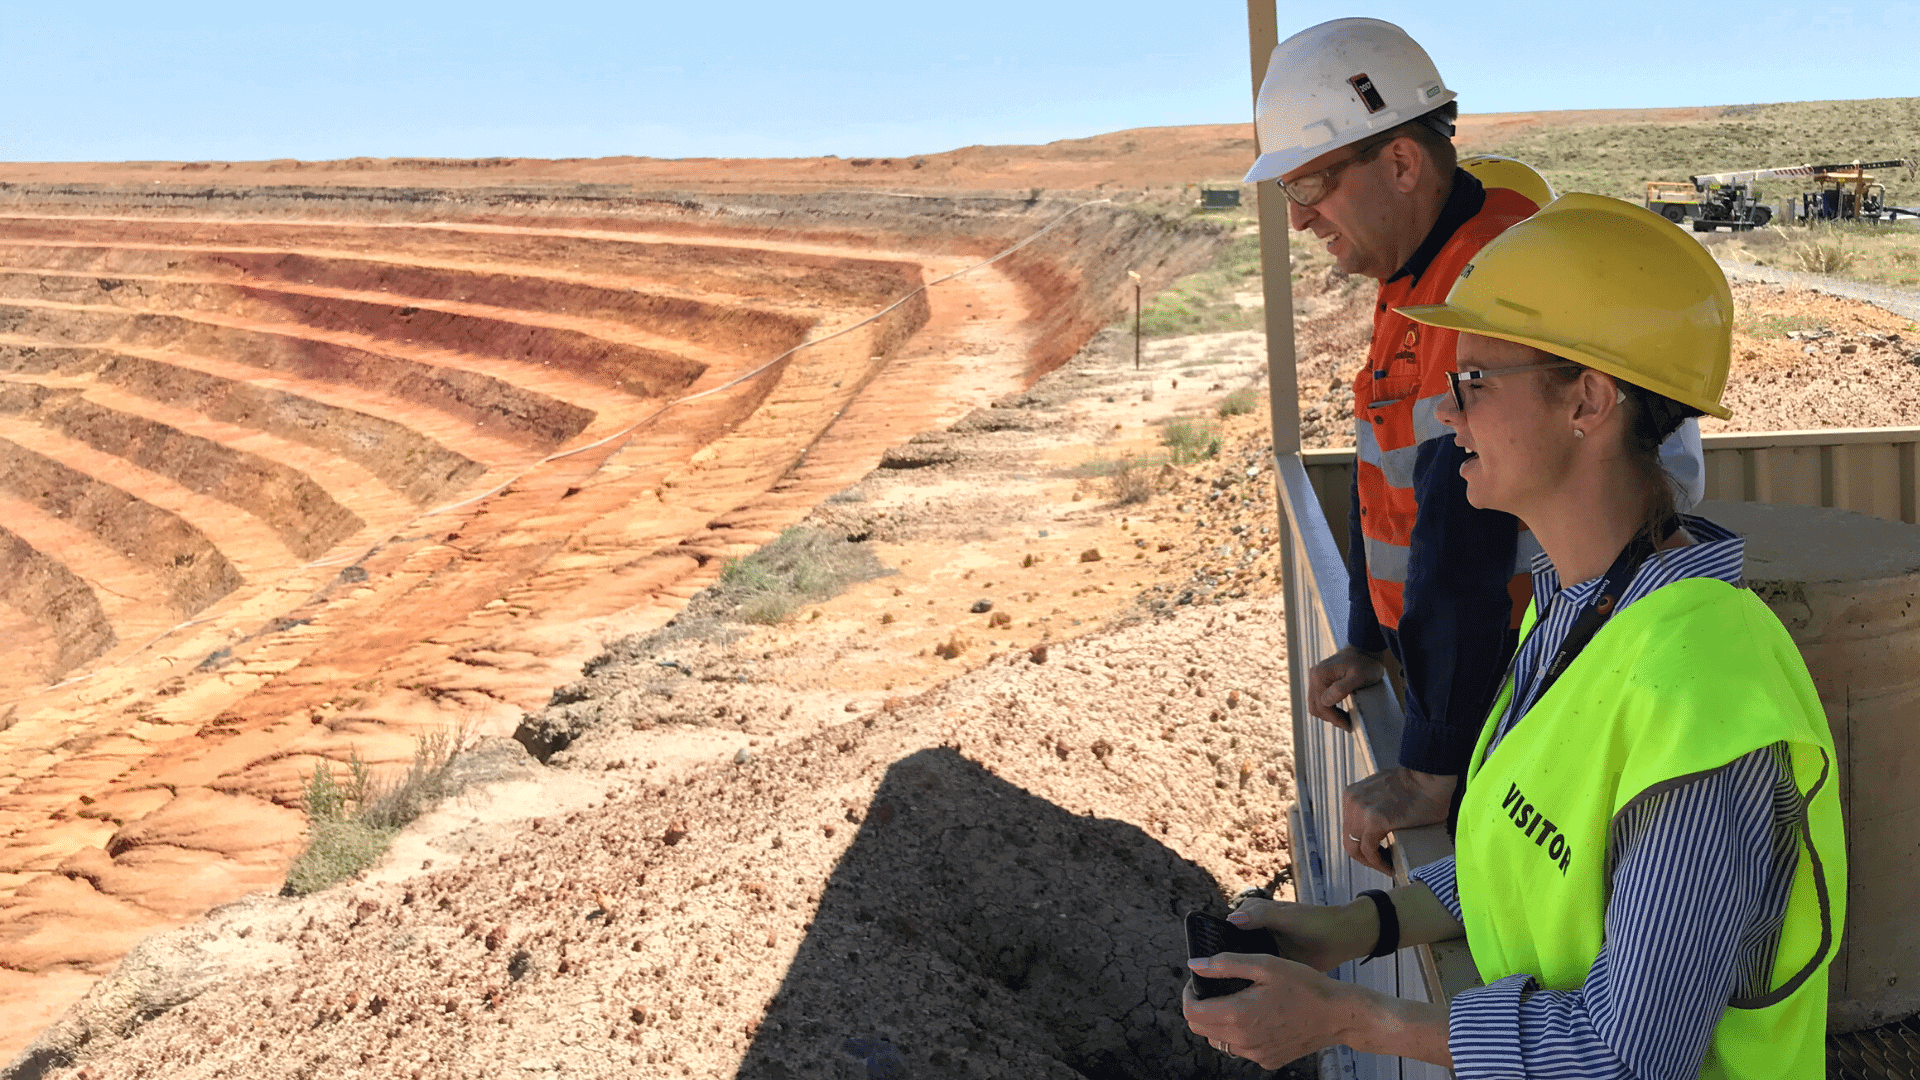 Member for Cootamundra Steph Cooke MP prior to social distancing inspects Lake Cowal Gold Mine in the Bland Shire with visitor high viz vest on and hard hat. The golden stacked quarry is visible in the background as a mining representative also looks on beside Steph.